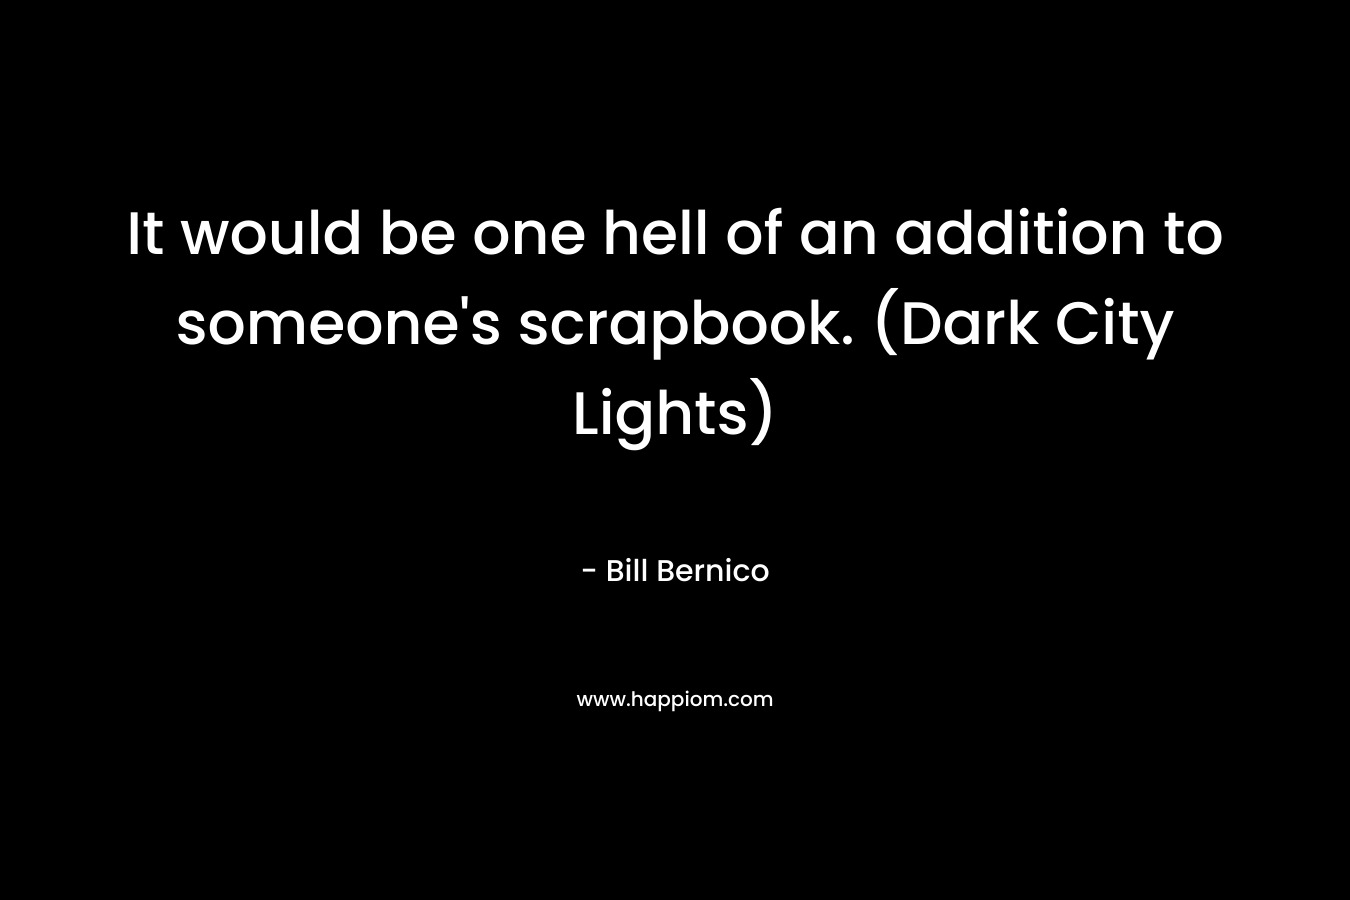 It would be one hell of an addition to someone’s scrapbook. (Dark City Lights) – Bill Bernico